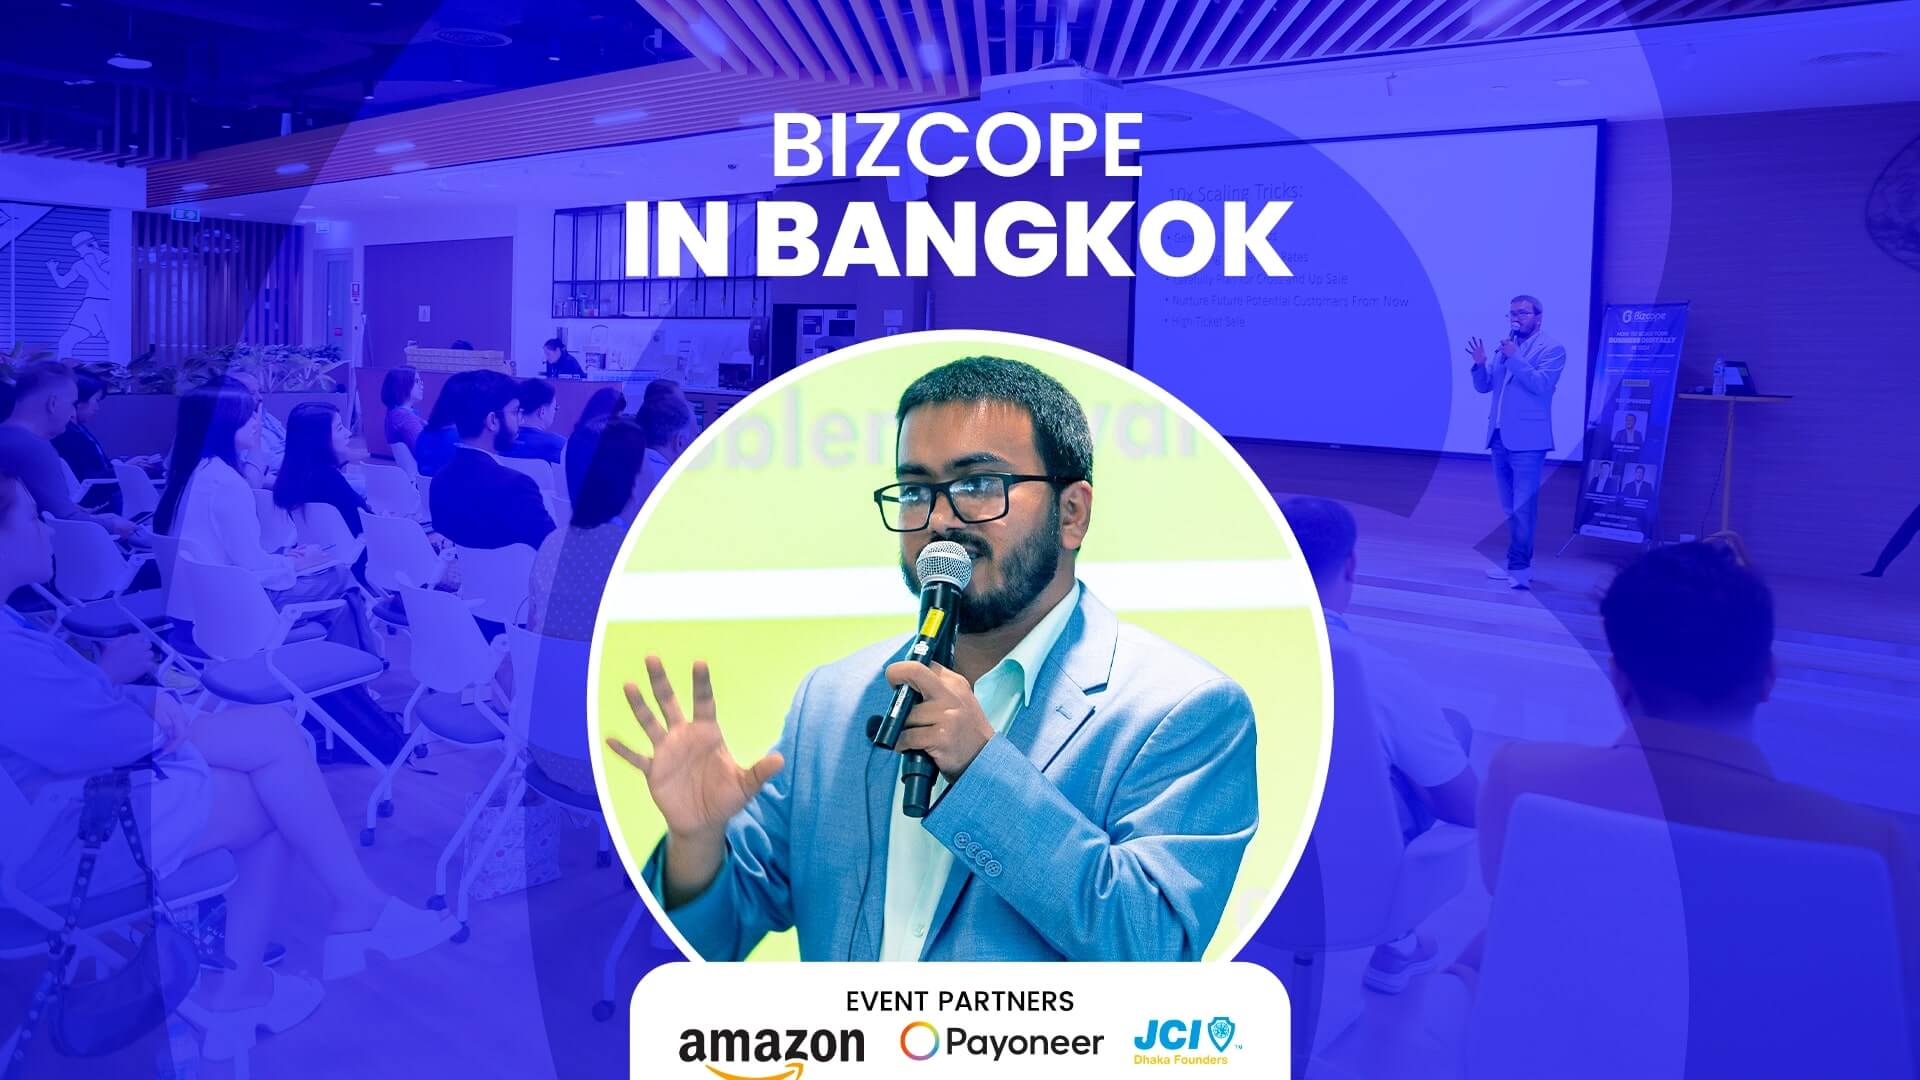 knowledge sharing event in Bangkok by Bizcope